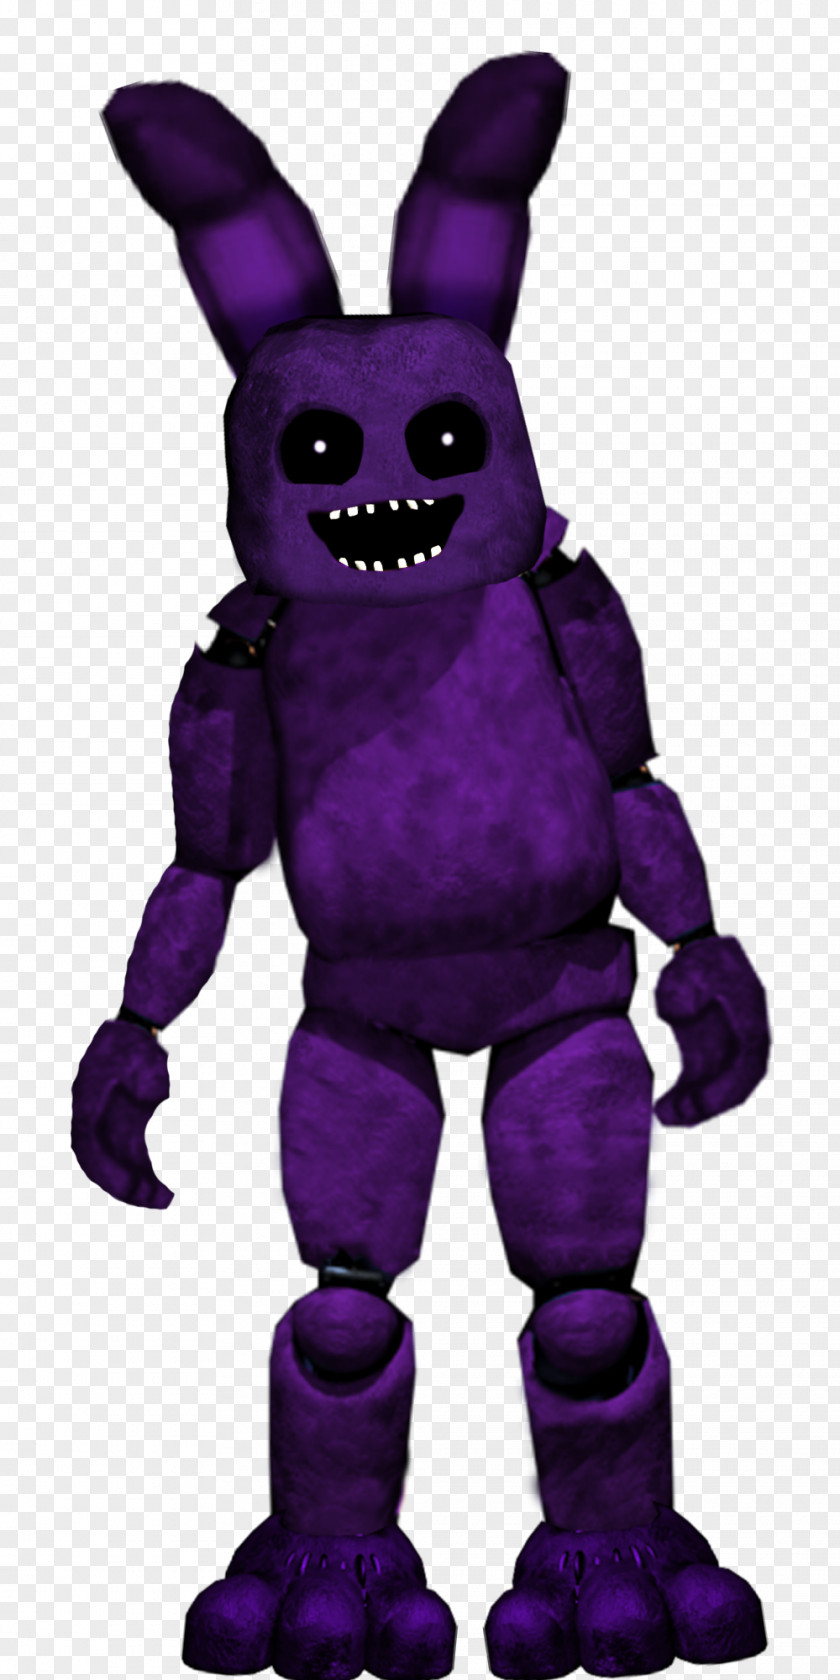 Five Nights At Freddy's 2 3 4 Jump Scare Art PNG